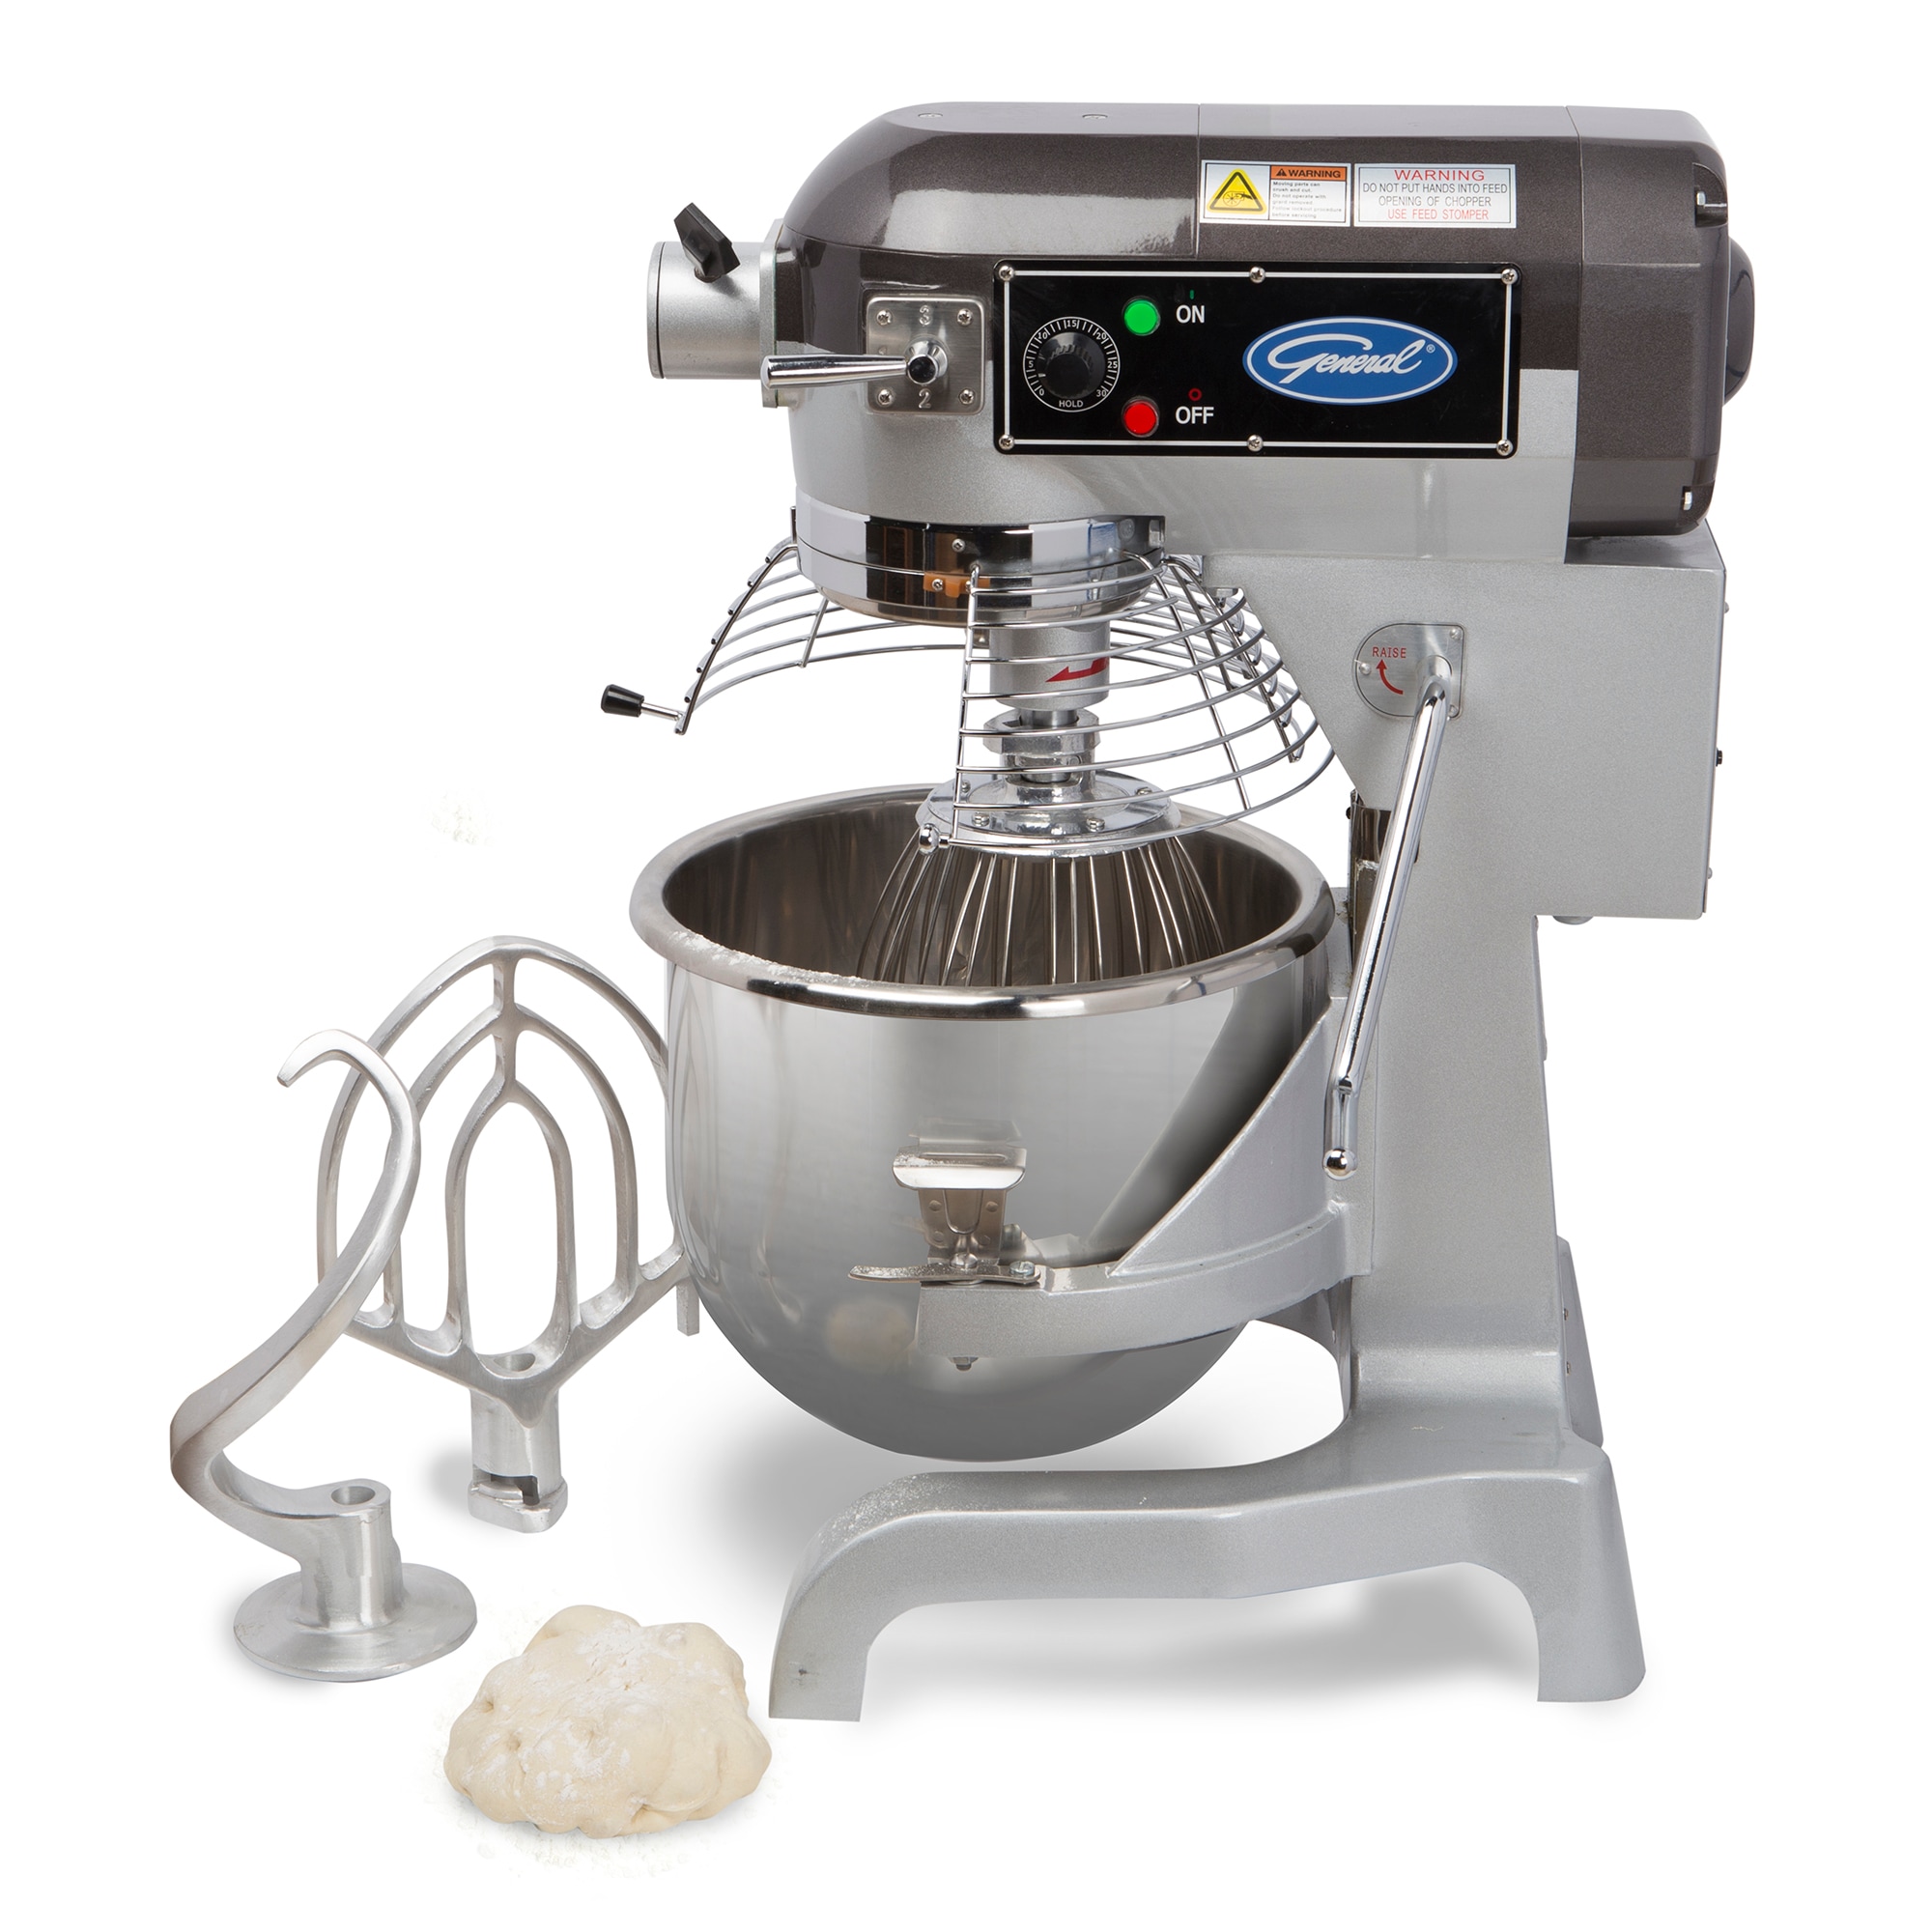 20 qt. Commercial Planetary Floor Baking Mixer with Guard and Timer